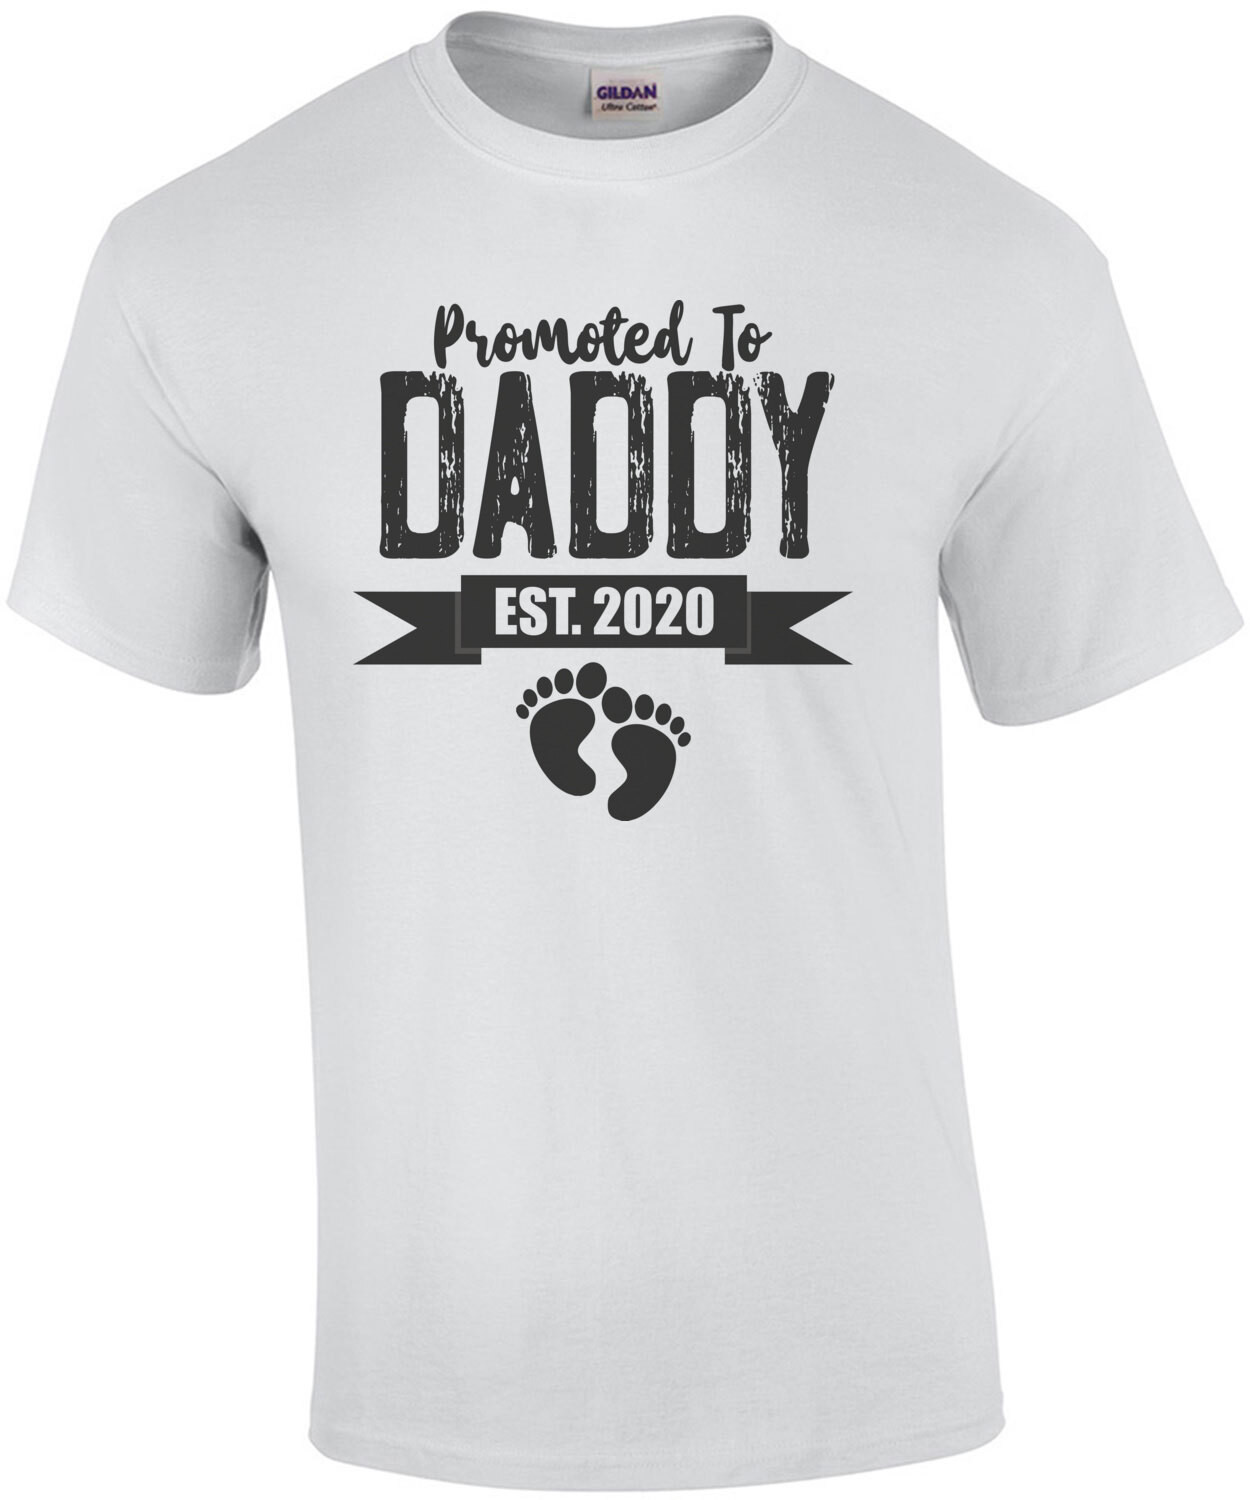 Promoted to Daddy EST. 2020 - Father T-Shirt